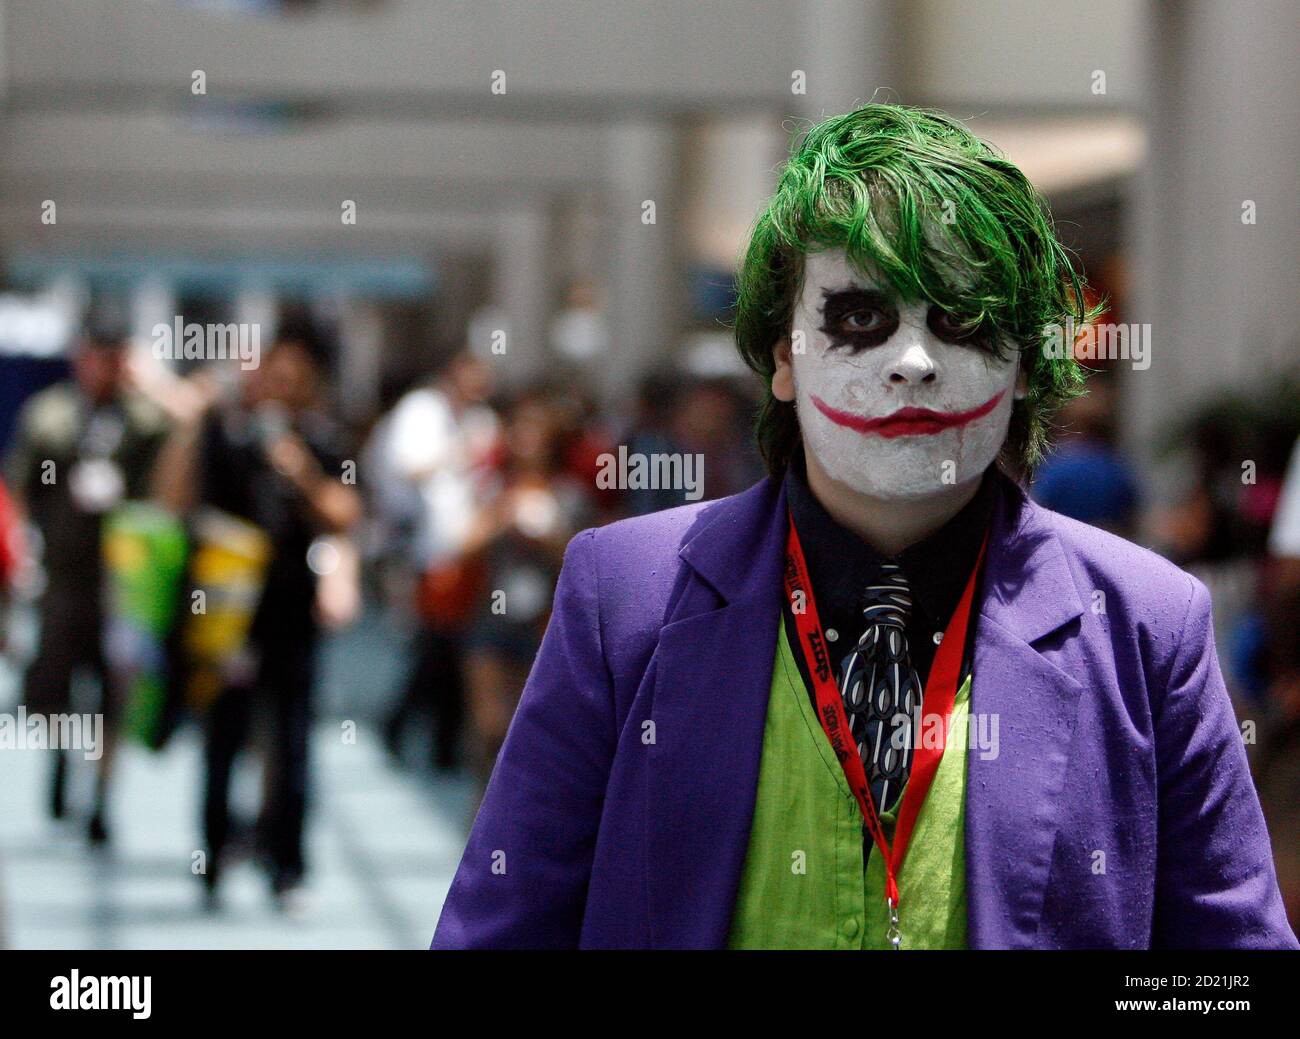 A visitor dressed like the Joker character from the movie 'The Dark Knight' walks during the 40th annual Comic Con Convention in San Diego July 23, 2009.  The convention runs July 23-26.  REUTERS/Mario Anzuoni   (UNITED STATES ENTERTAINMENT) Stock Photo